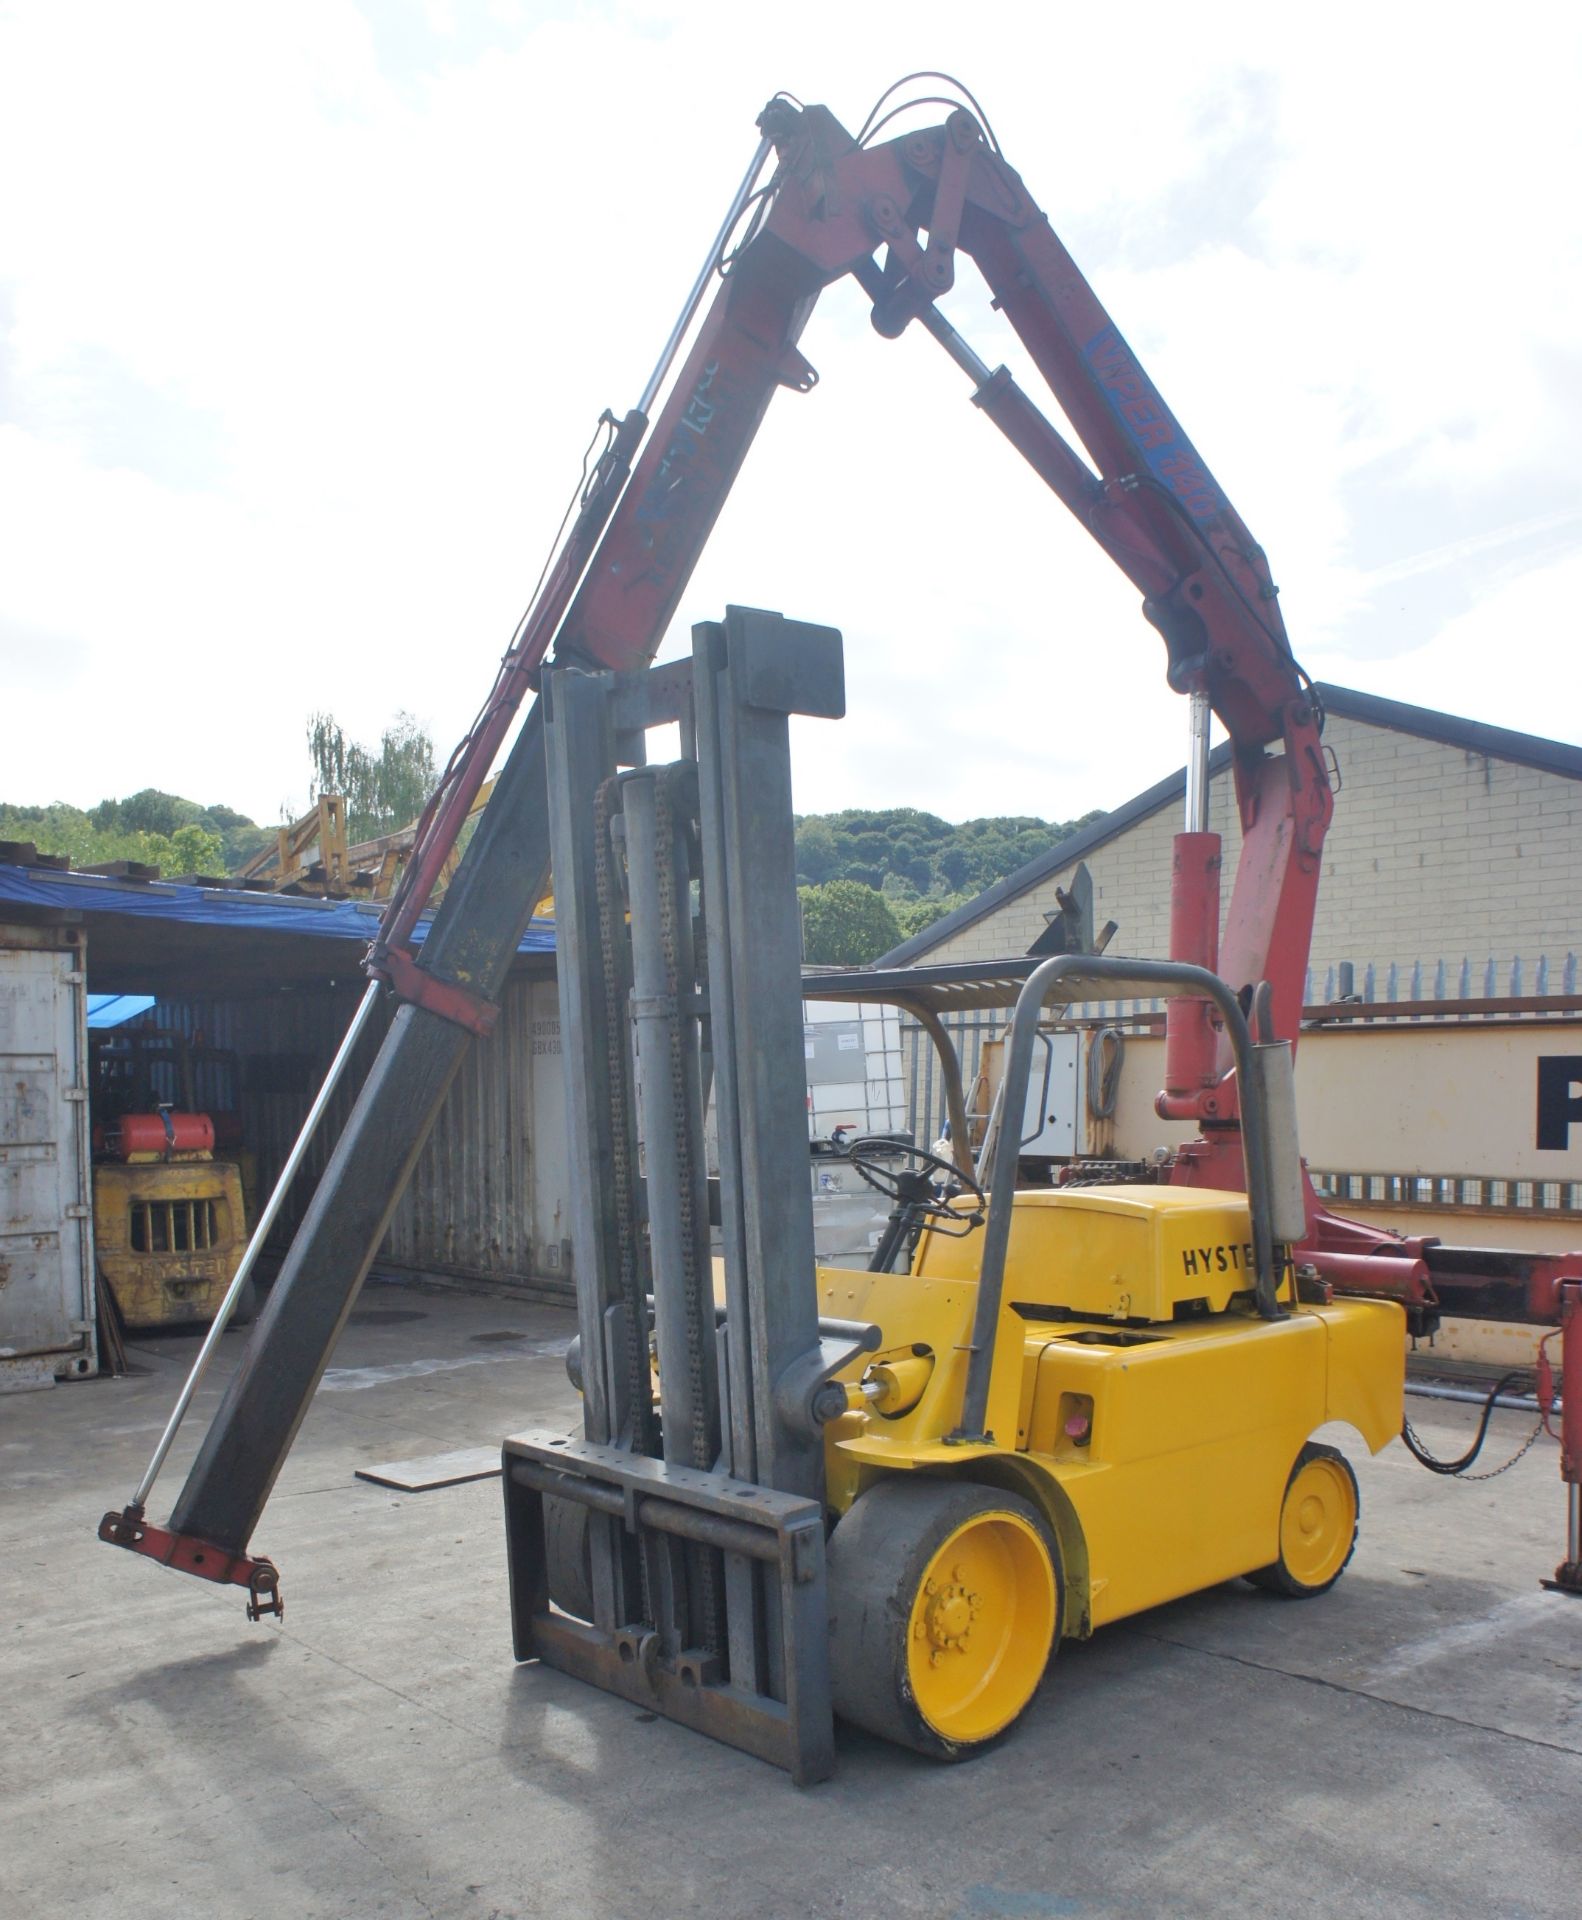 * Hyster S150A Counterbalance Forklift Truck, diesel, capacity 7000kg, duplex mast, lift height: